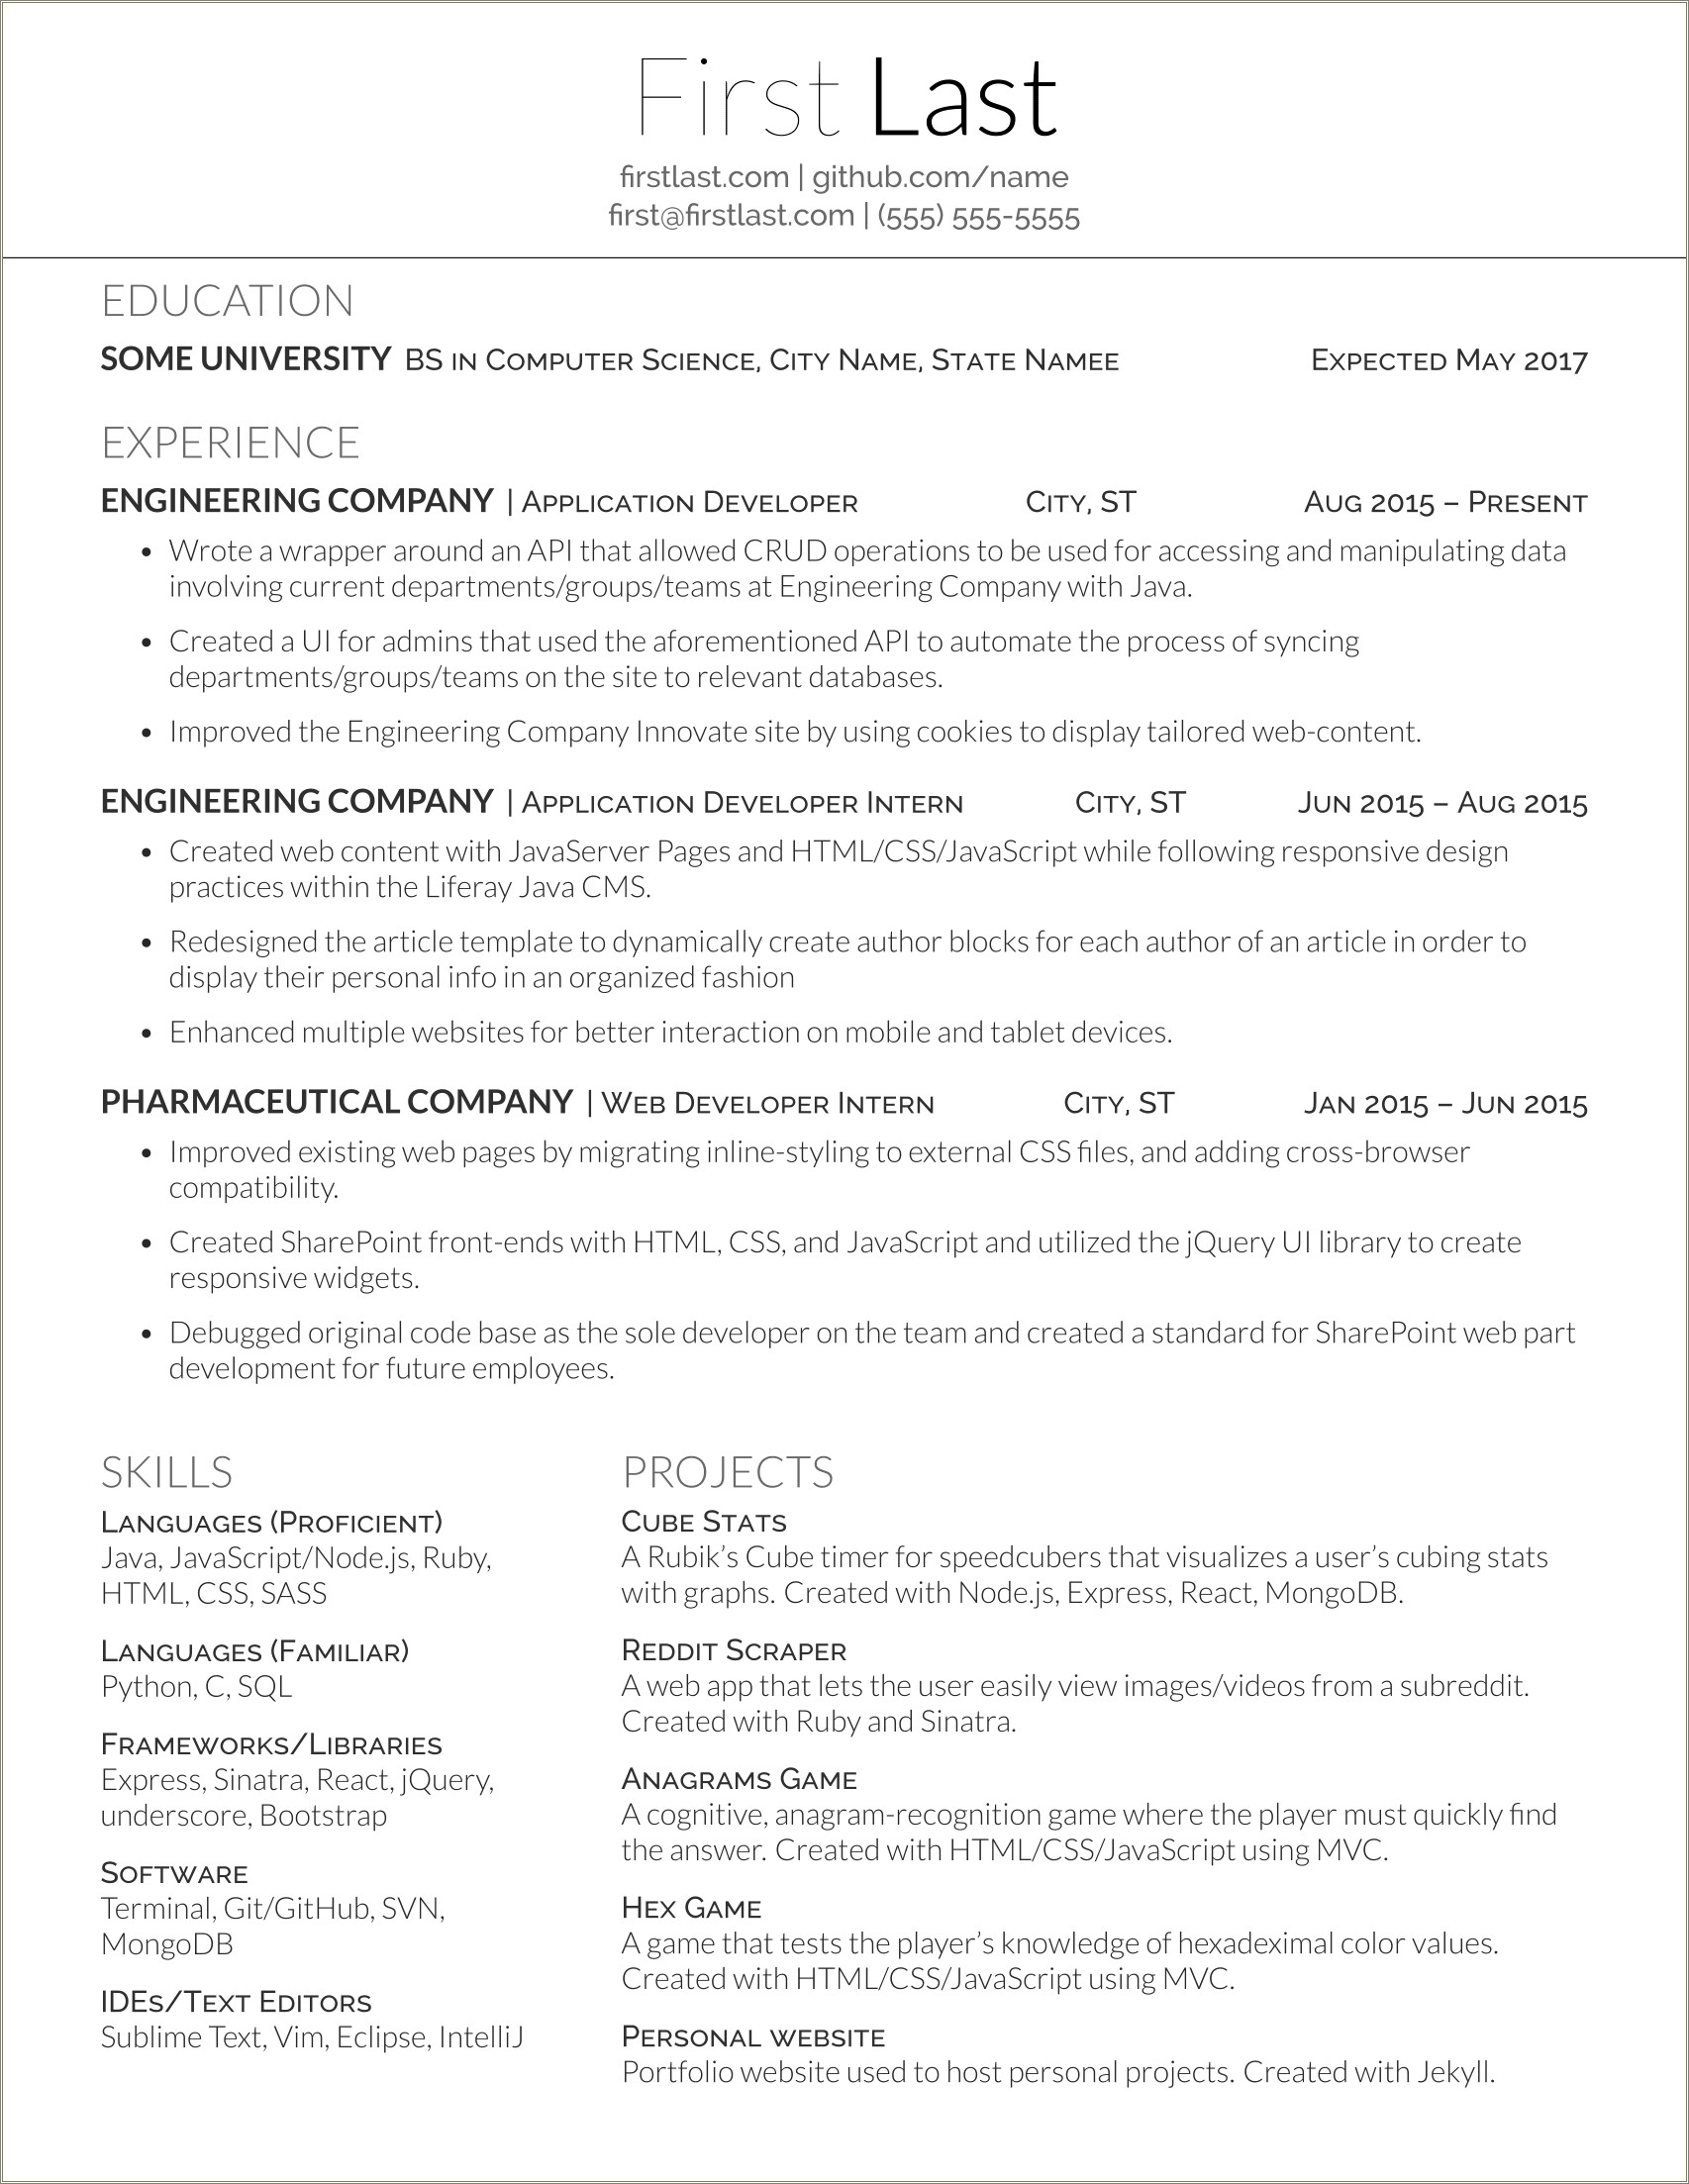 Put Link To Project In Resume Reddit